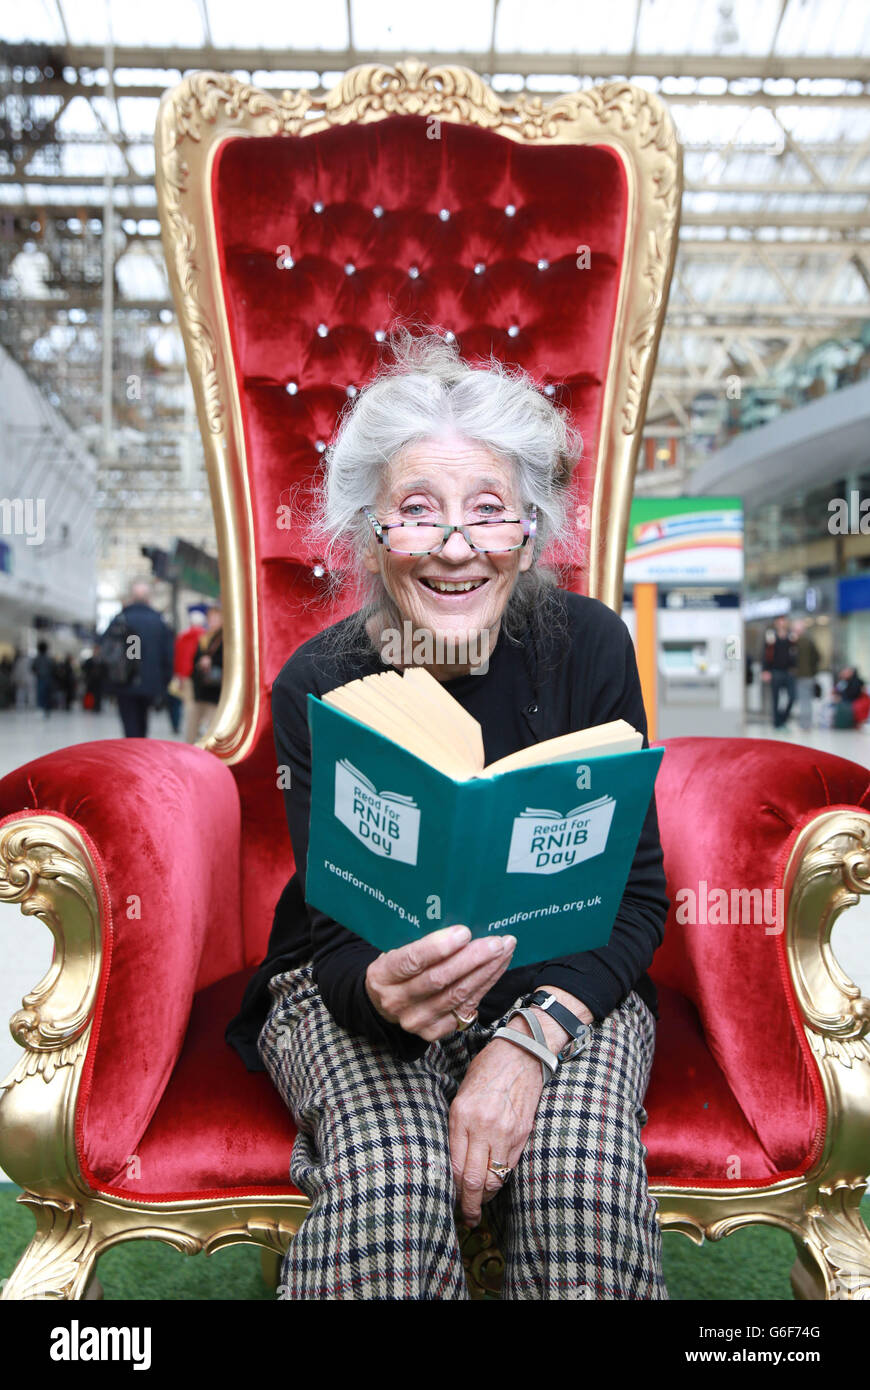 Actress Phyllida Law at Waterloo Station in London to record passages from Lewis Carroll's classic, Alice's Adventures in Wonderland book to mark Read for RNIB day, the annual charity event from The Royal National Institute of Blind People (RNIB). Stock Photo